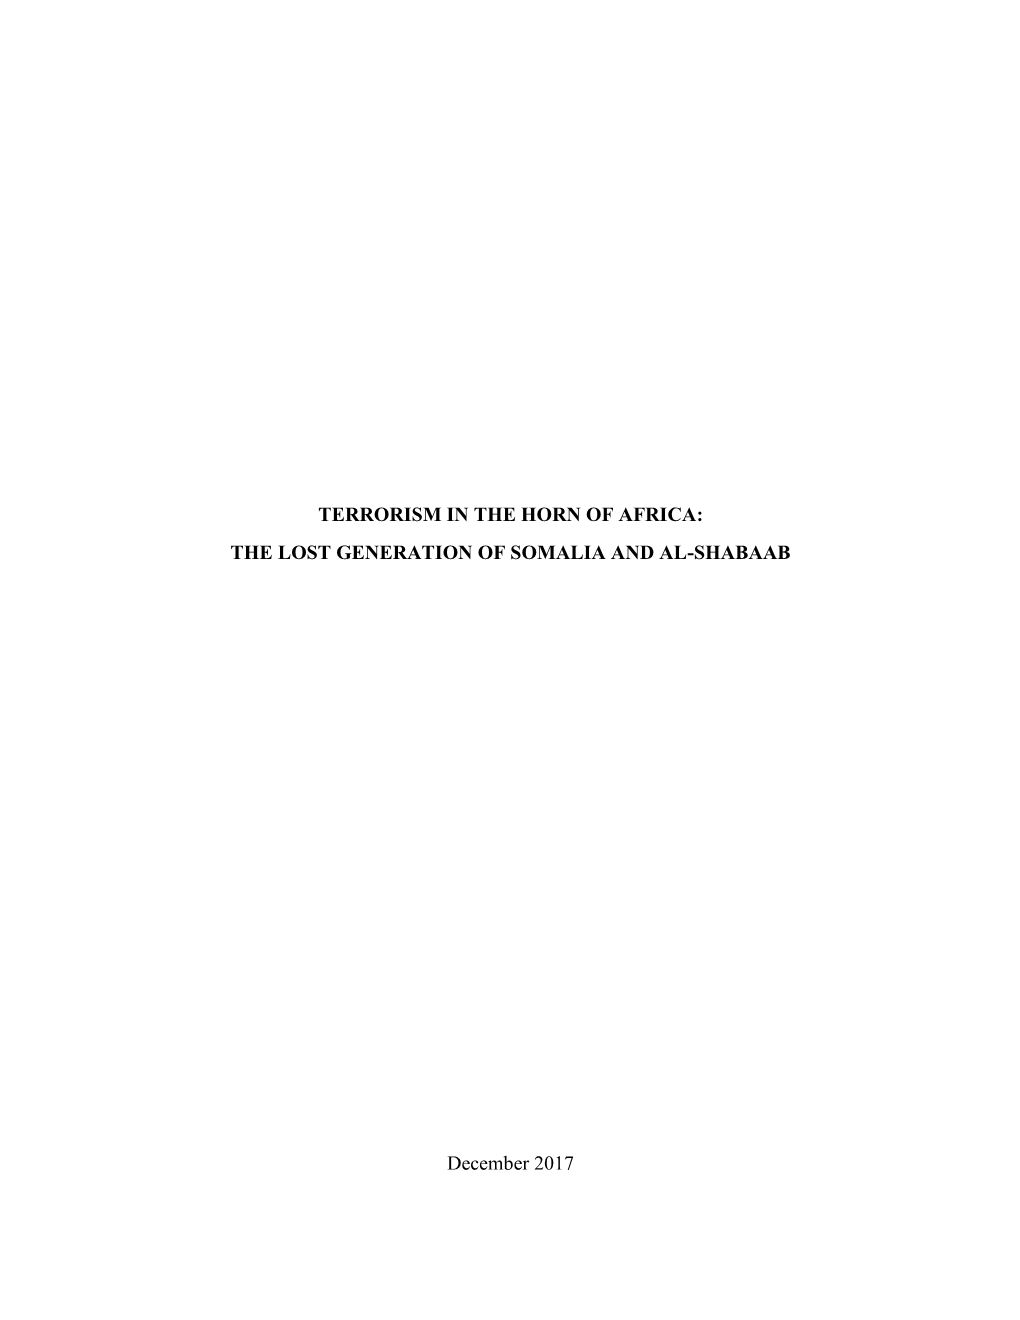 Terrorism in the Horn of Africa: the Lost Generation of Somalia and Al-Shabaab